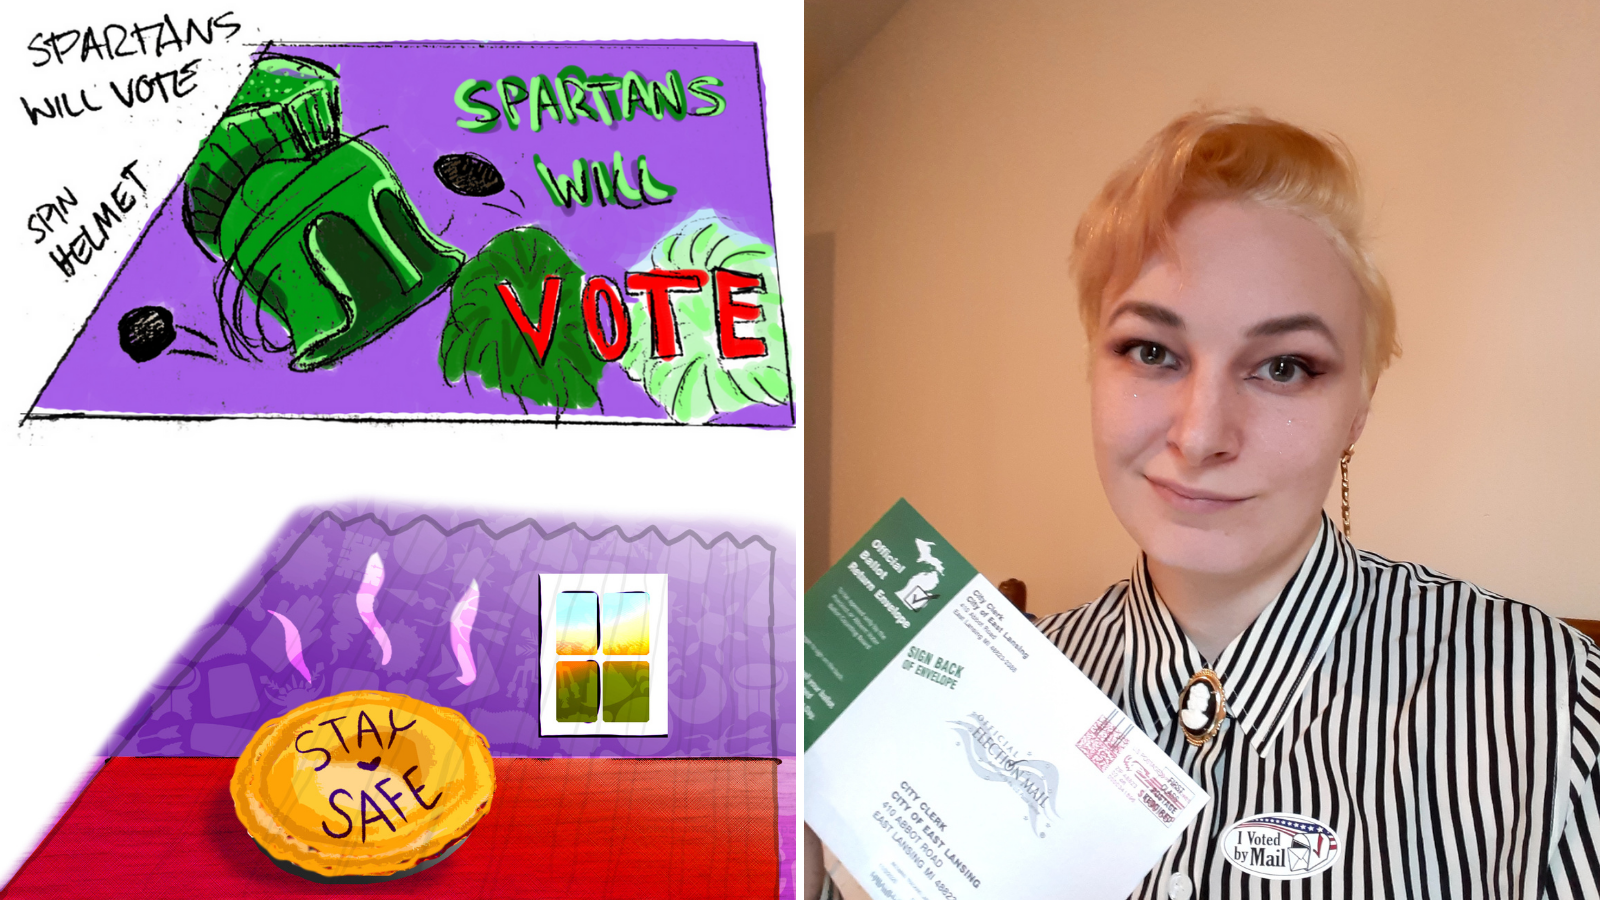 MSU Theatre Grad Student Uses Projection Mapping to Get Out the Vote